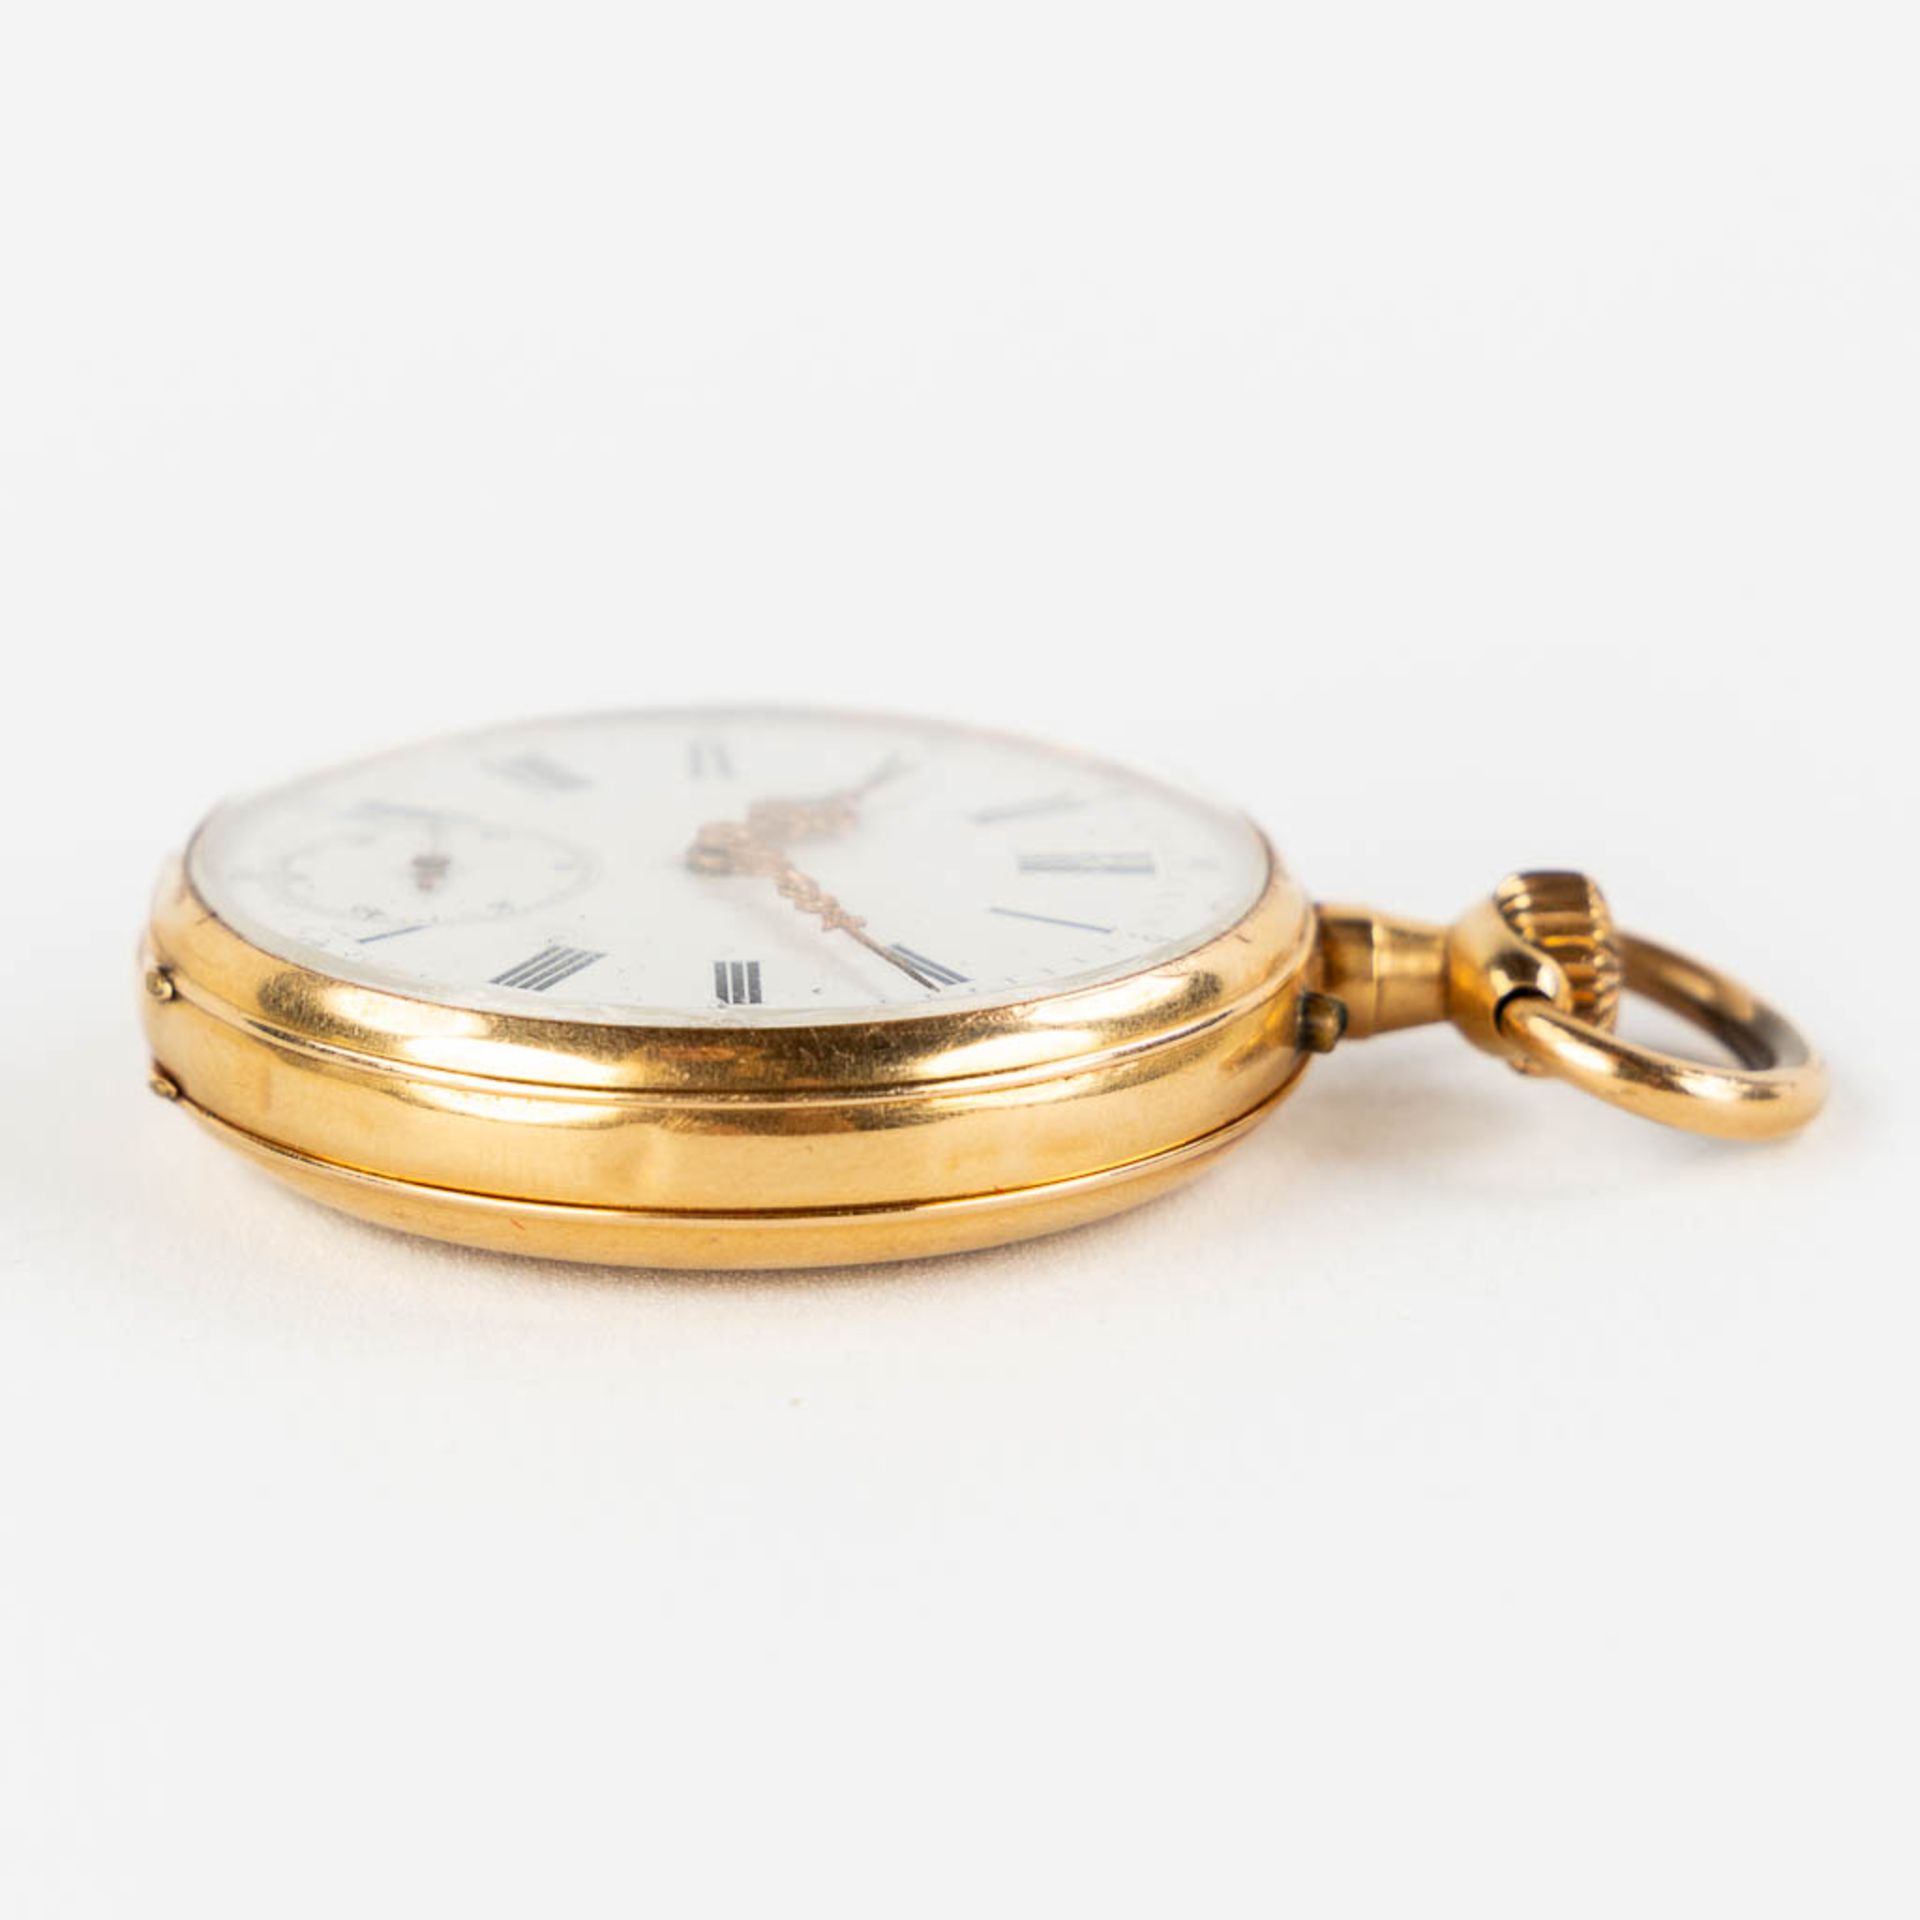 An antique pocket watch, 18kt yellow gold with a white enamel dial. (H:6,3 x D:4,3 cm) - Image 6 of 10